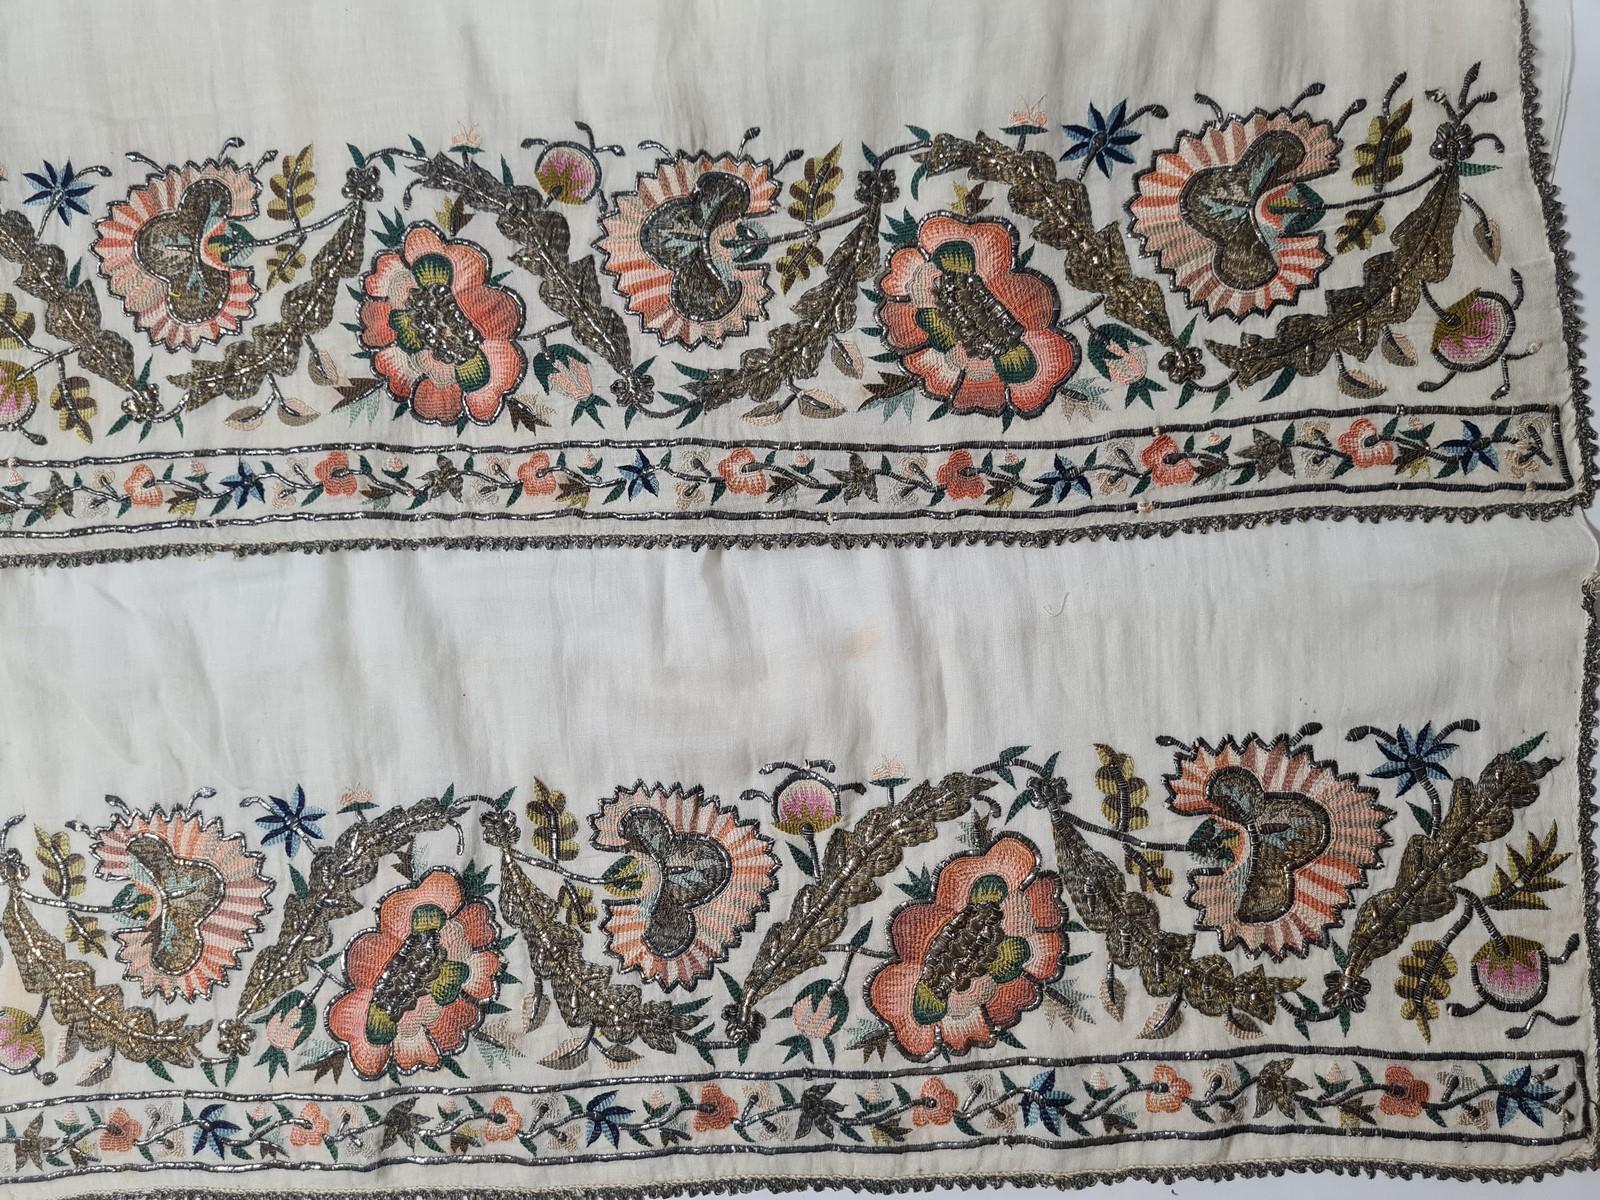 Hammam Scarf in gold embroidered cotton veil - Ottoman Empire late 18th century 1